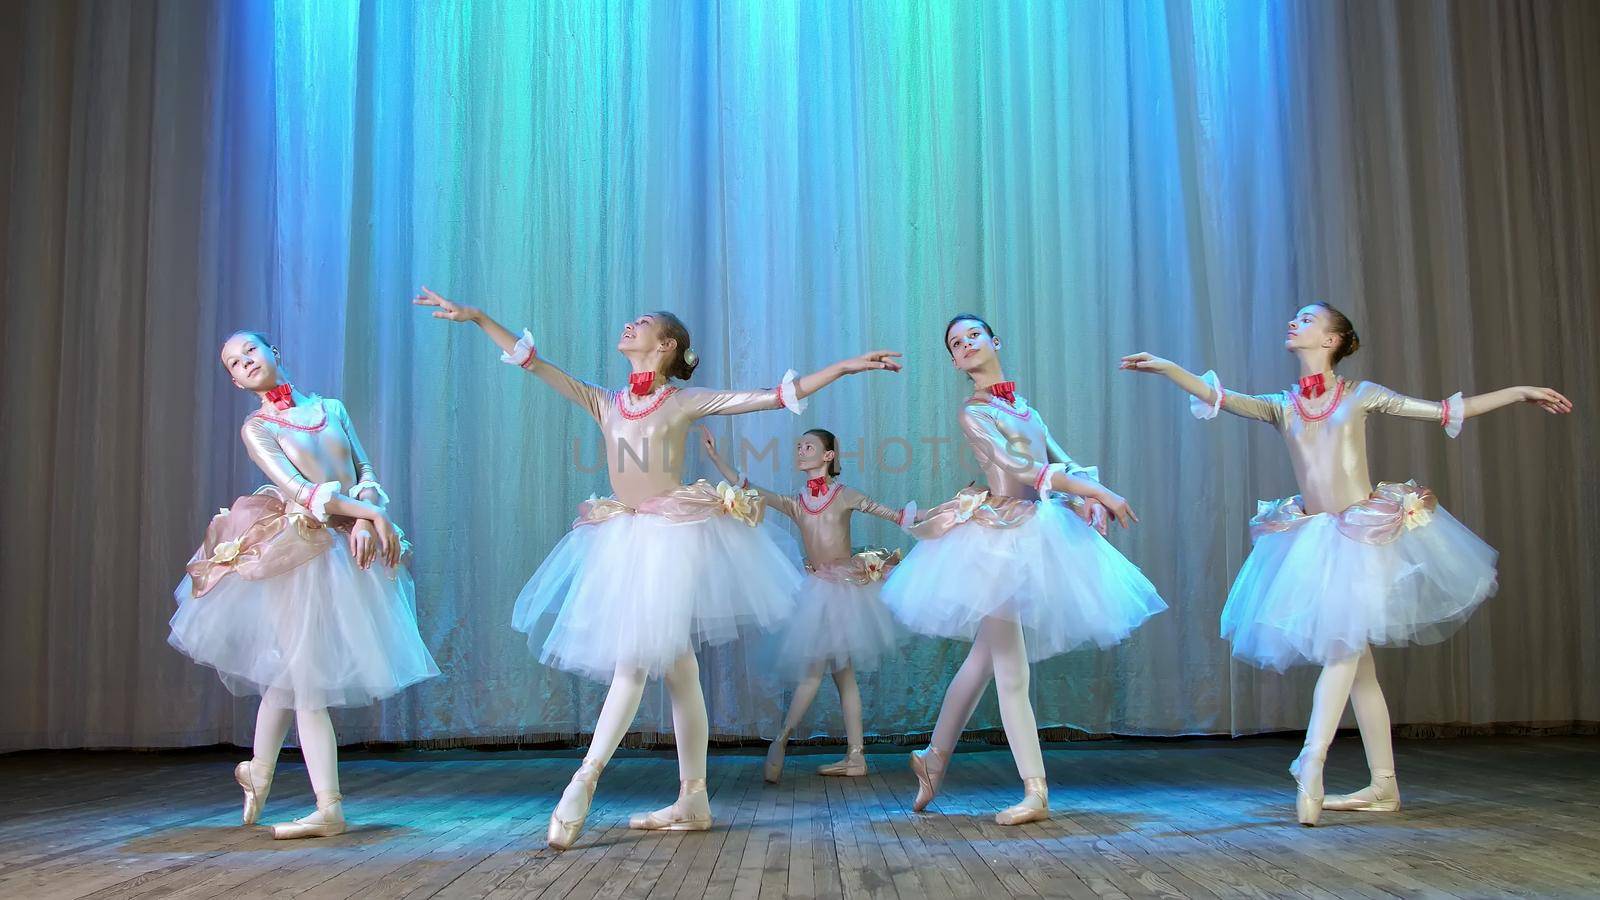 ballet rehearsal, on the stage of the old theater hall. Young ballerinas in elegant dresses and pointe shoes, dance elegantly certain ballet motions, pass, scenic bow. High quality photo